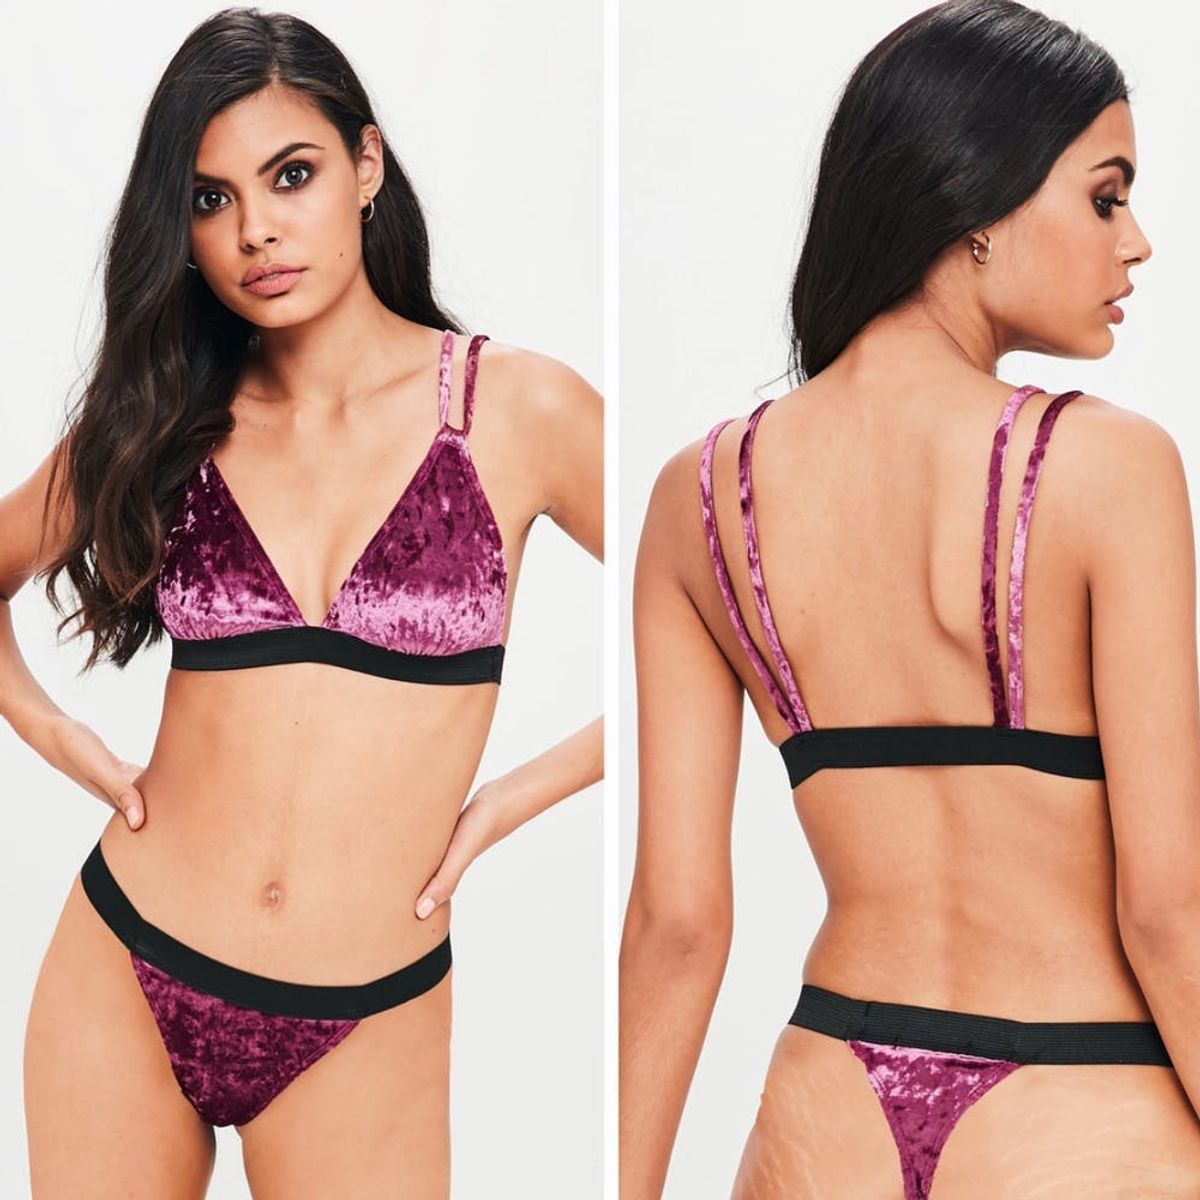 Missguided Is Done Photoshopping Its Models’ Stretch Marks